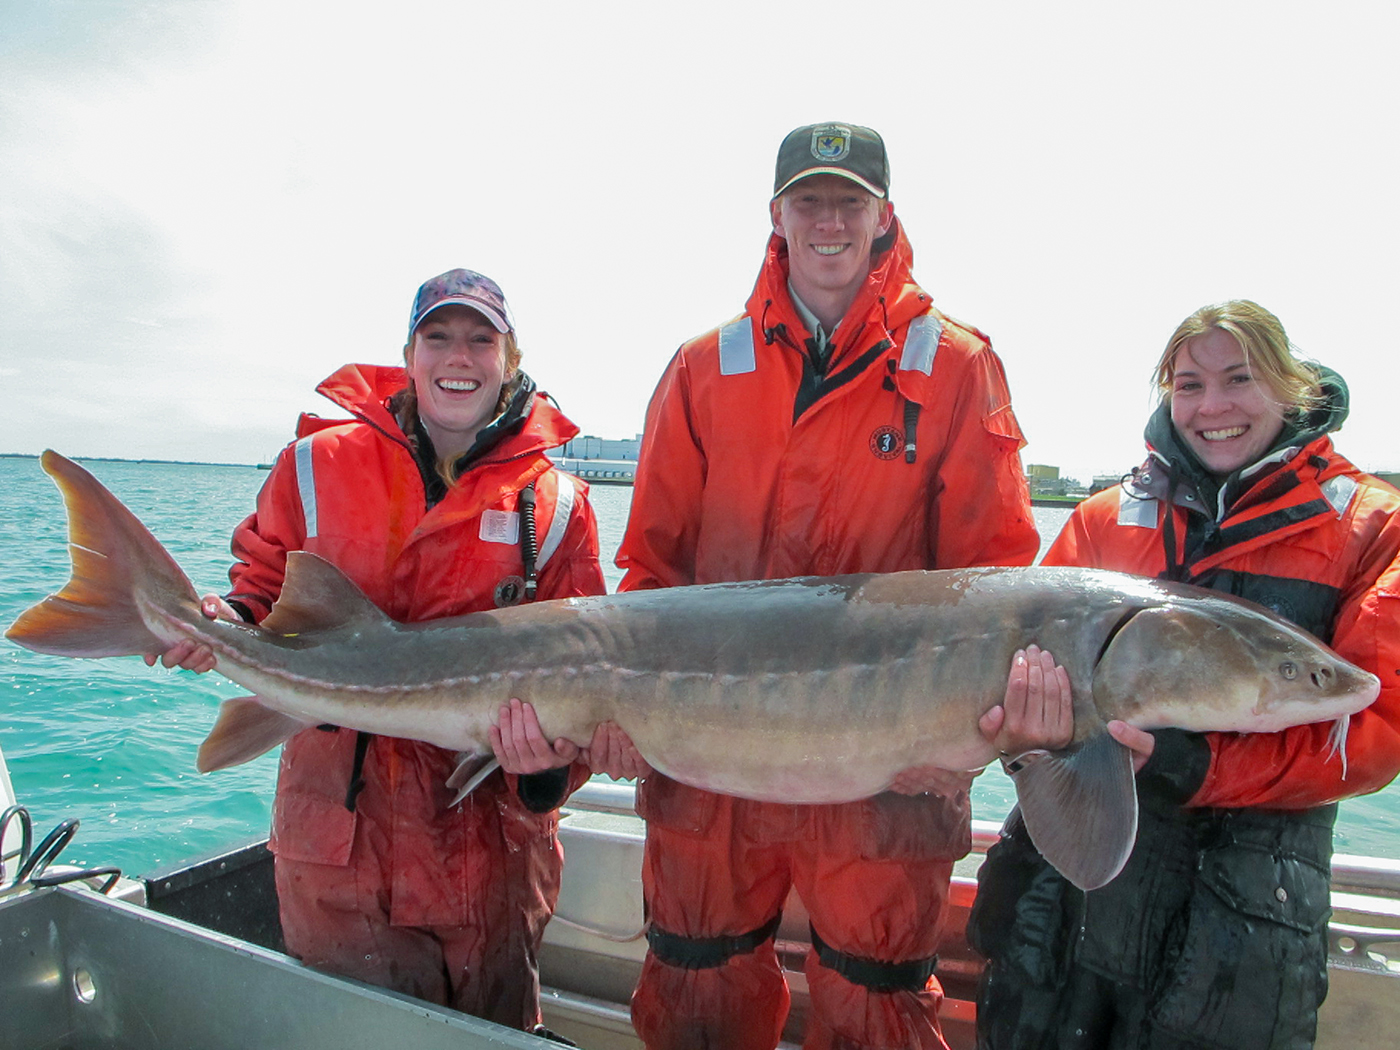 A two hyndred pound lake sturgeon is held by three scrientists while standing in a fishing boat.